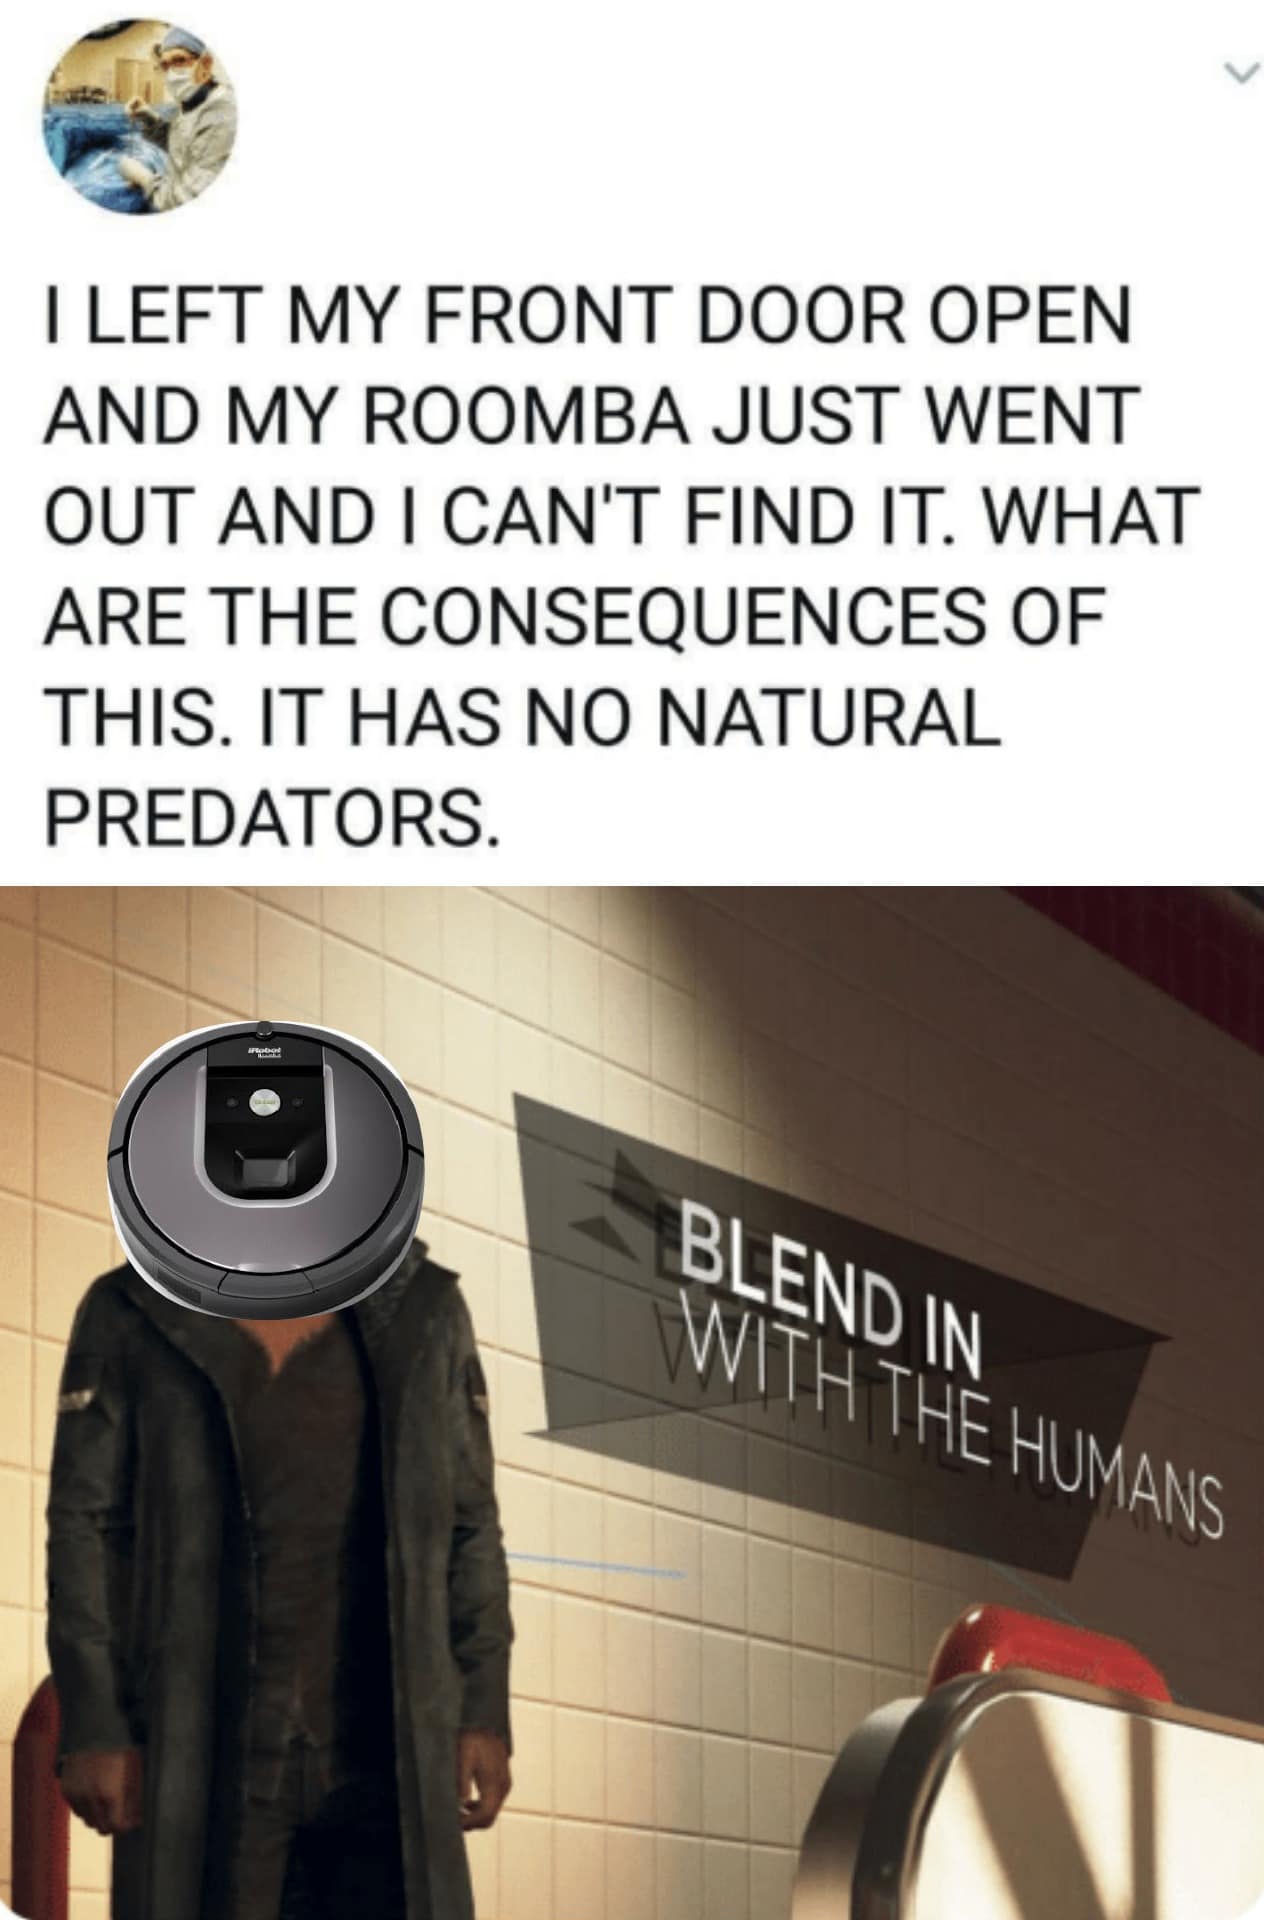 Funny, Roomba, Become Human, Roombas, Detroit, YouFellForItFool other memes Funny, Roomba, Become Human, Roombas, Detroit, YouFellForItFool text: I LEFT MY FRONT DOOR OPEN AND MY ROOMBA JUST WENT OUT AND I CAN'T FIND IT. WHAT ARE THE CONSEQUENCES OF THIS. IT HAS NO NATURAL PREDATORS. BLEN HUMANS 